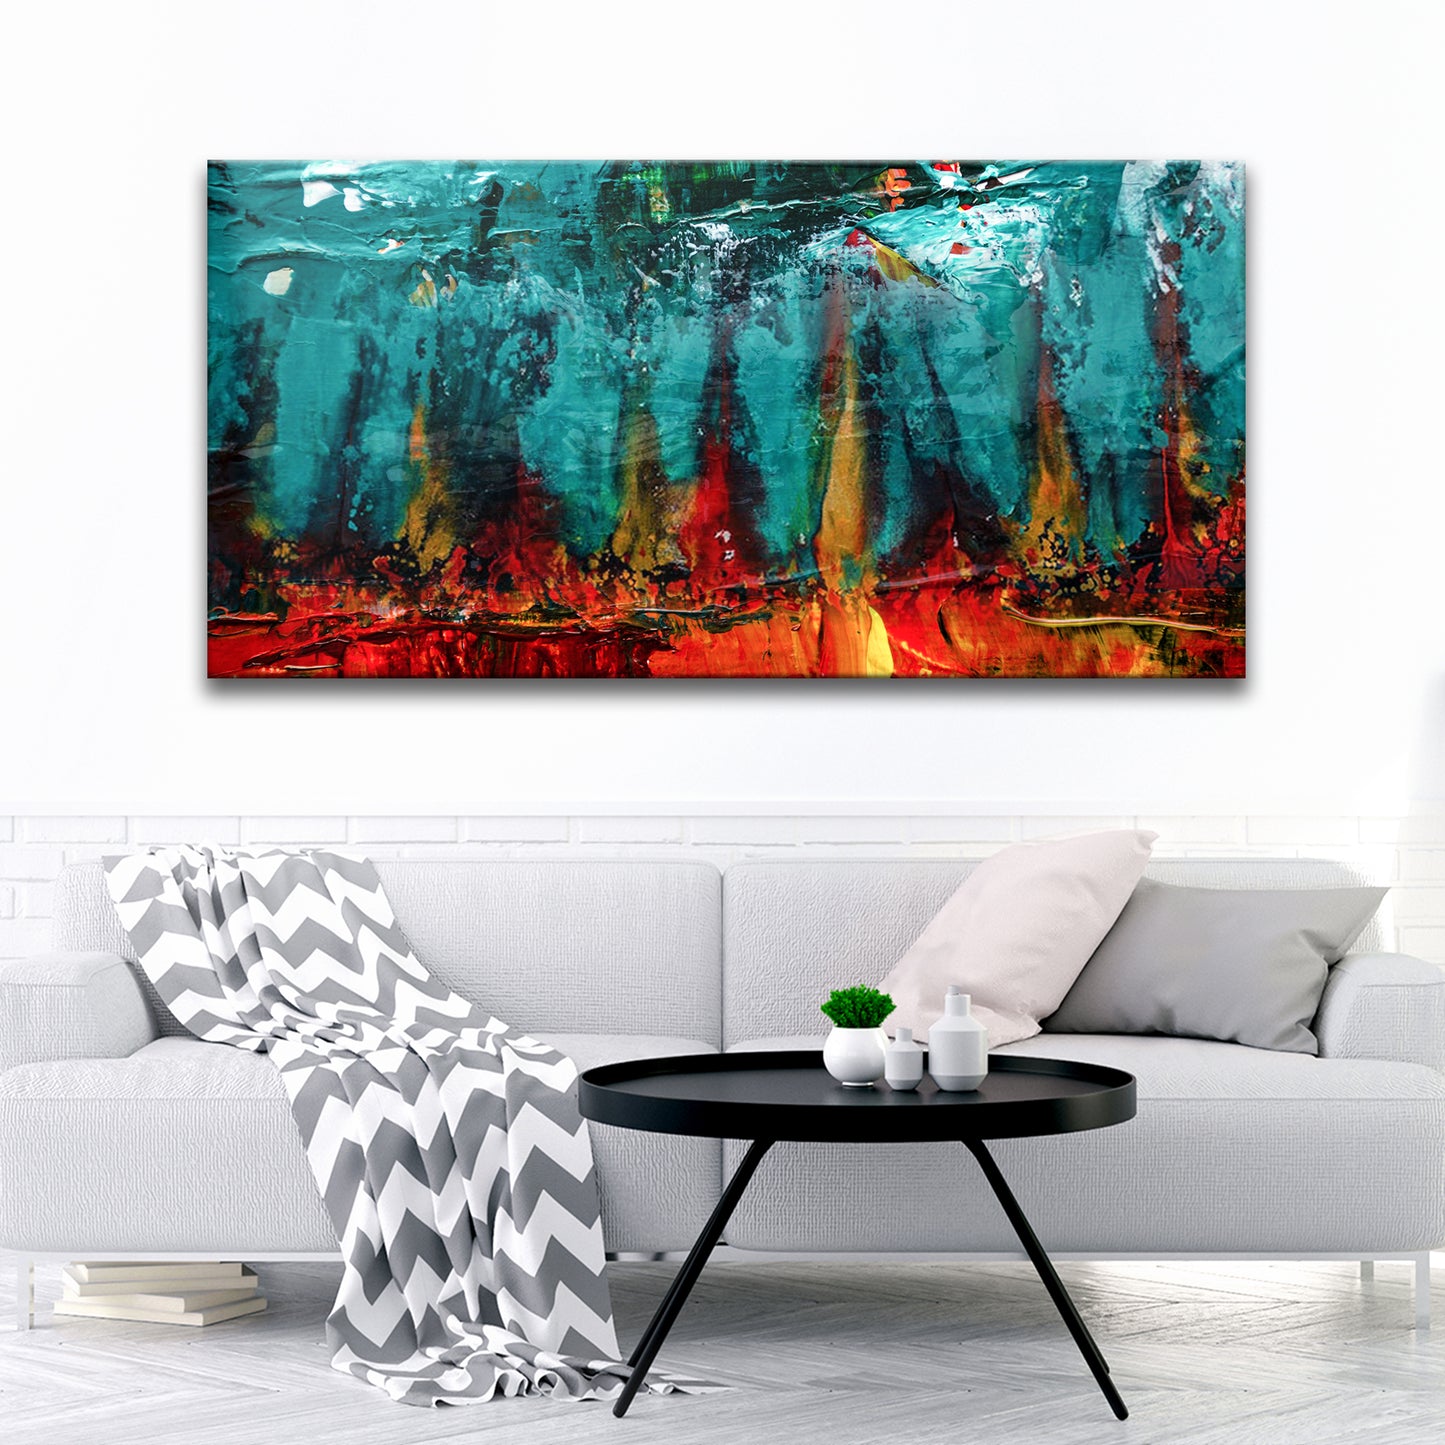 Teal Flame Effect Canvas Wall Art - Image by Tailored Canvases